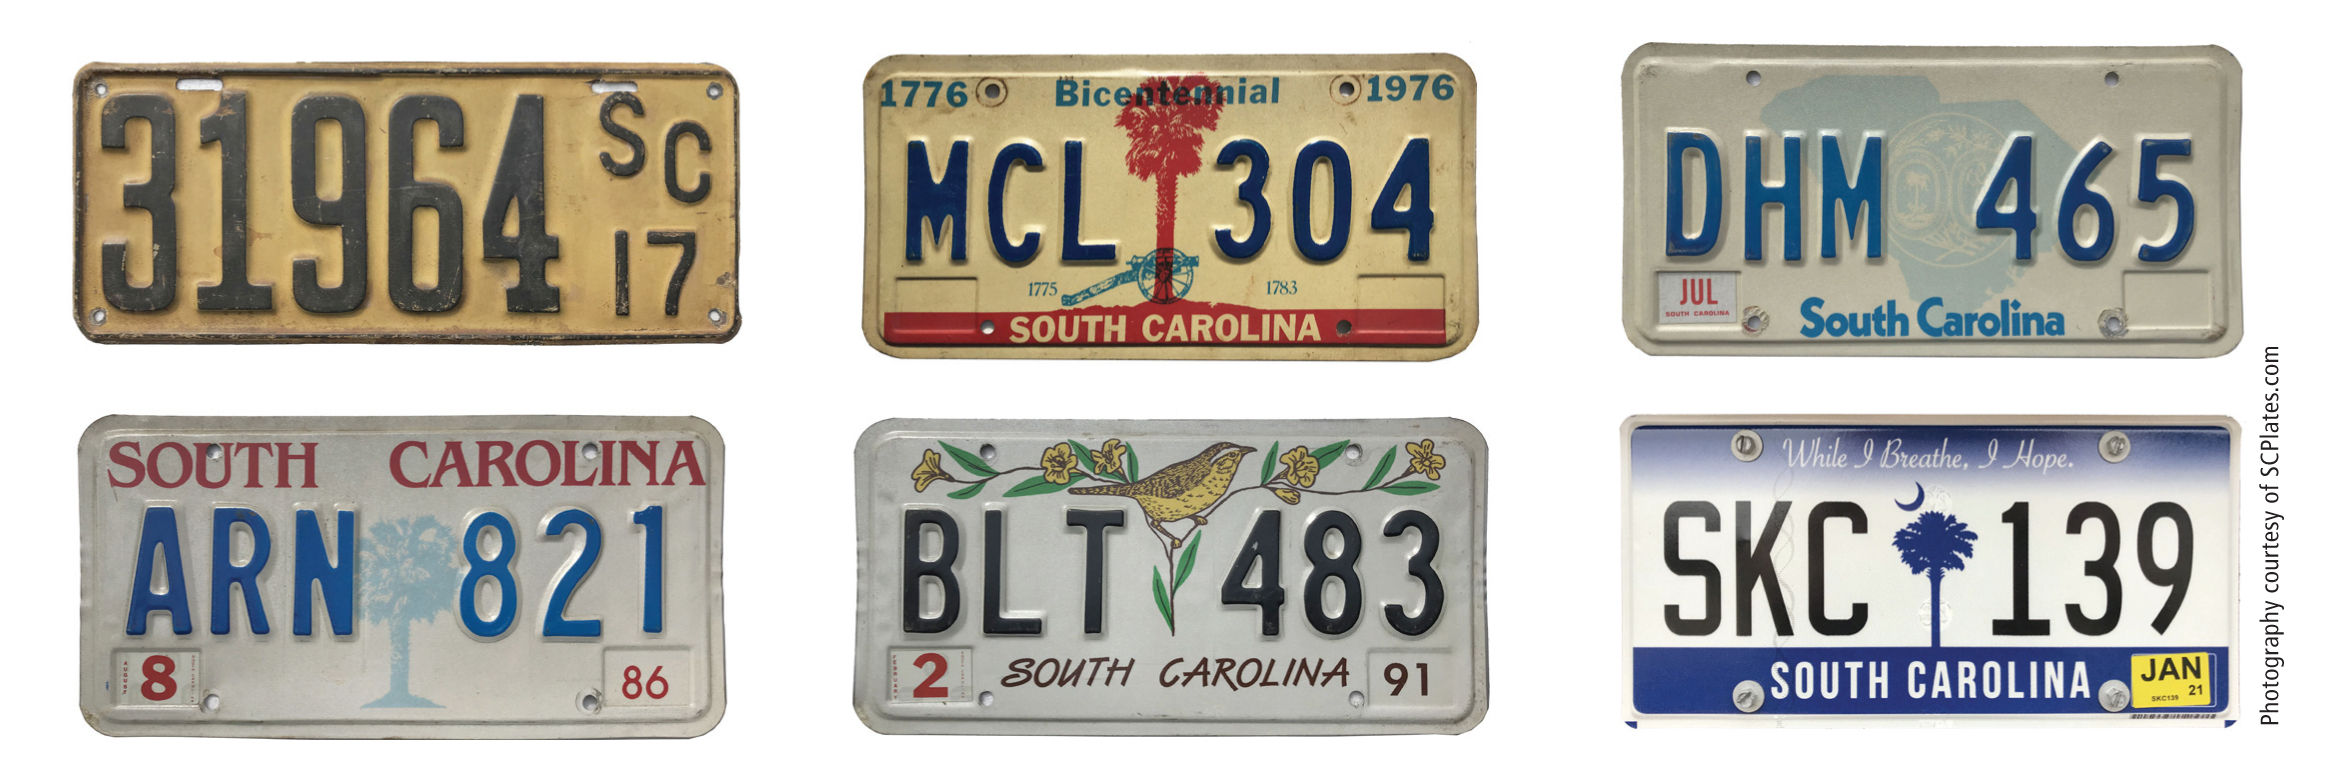 1917: The 1917 plate was the first year of state-issued plates, outsourced to a company in New York for manufacturing.1976: The 1976 plate was South Carolina’s first multi-year plate, used for five years, and the first full-color graphic plate. 1981 (DHM 465): This standard plate design from 1981 to 1985 also became permanent government plates that can still be seen today. 1986: A standard plate from 1986 to 1990. 1991: The standard plate from 1991 to 1997, highlighting the Carolina wren, our state bird, and yellow jessamine, our state flower. Critics contend that the bird's tailfeather is not at a proper angle. 2021: Our current standard plate that started in 2016, the first to be phased in rather than fully replacing old plates in a single year. It features the state motto “While I Breathe, I Hope” as translated from the Latin dum spiro spero on the state seal.